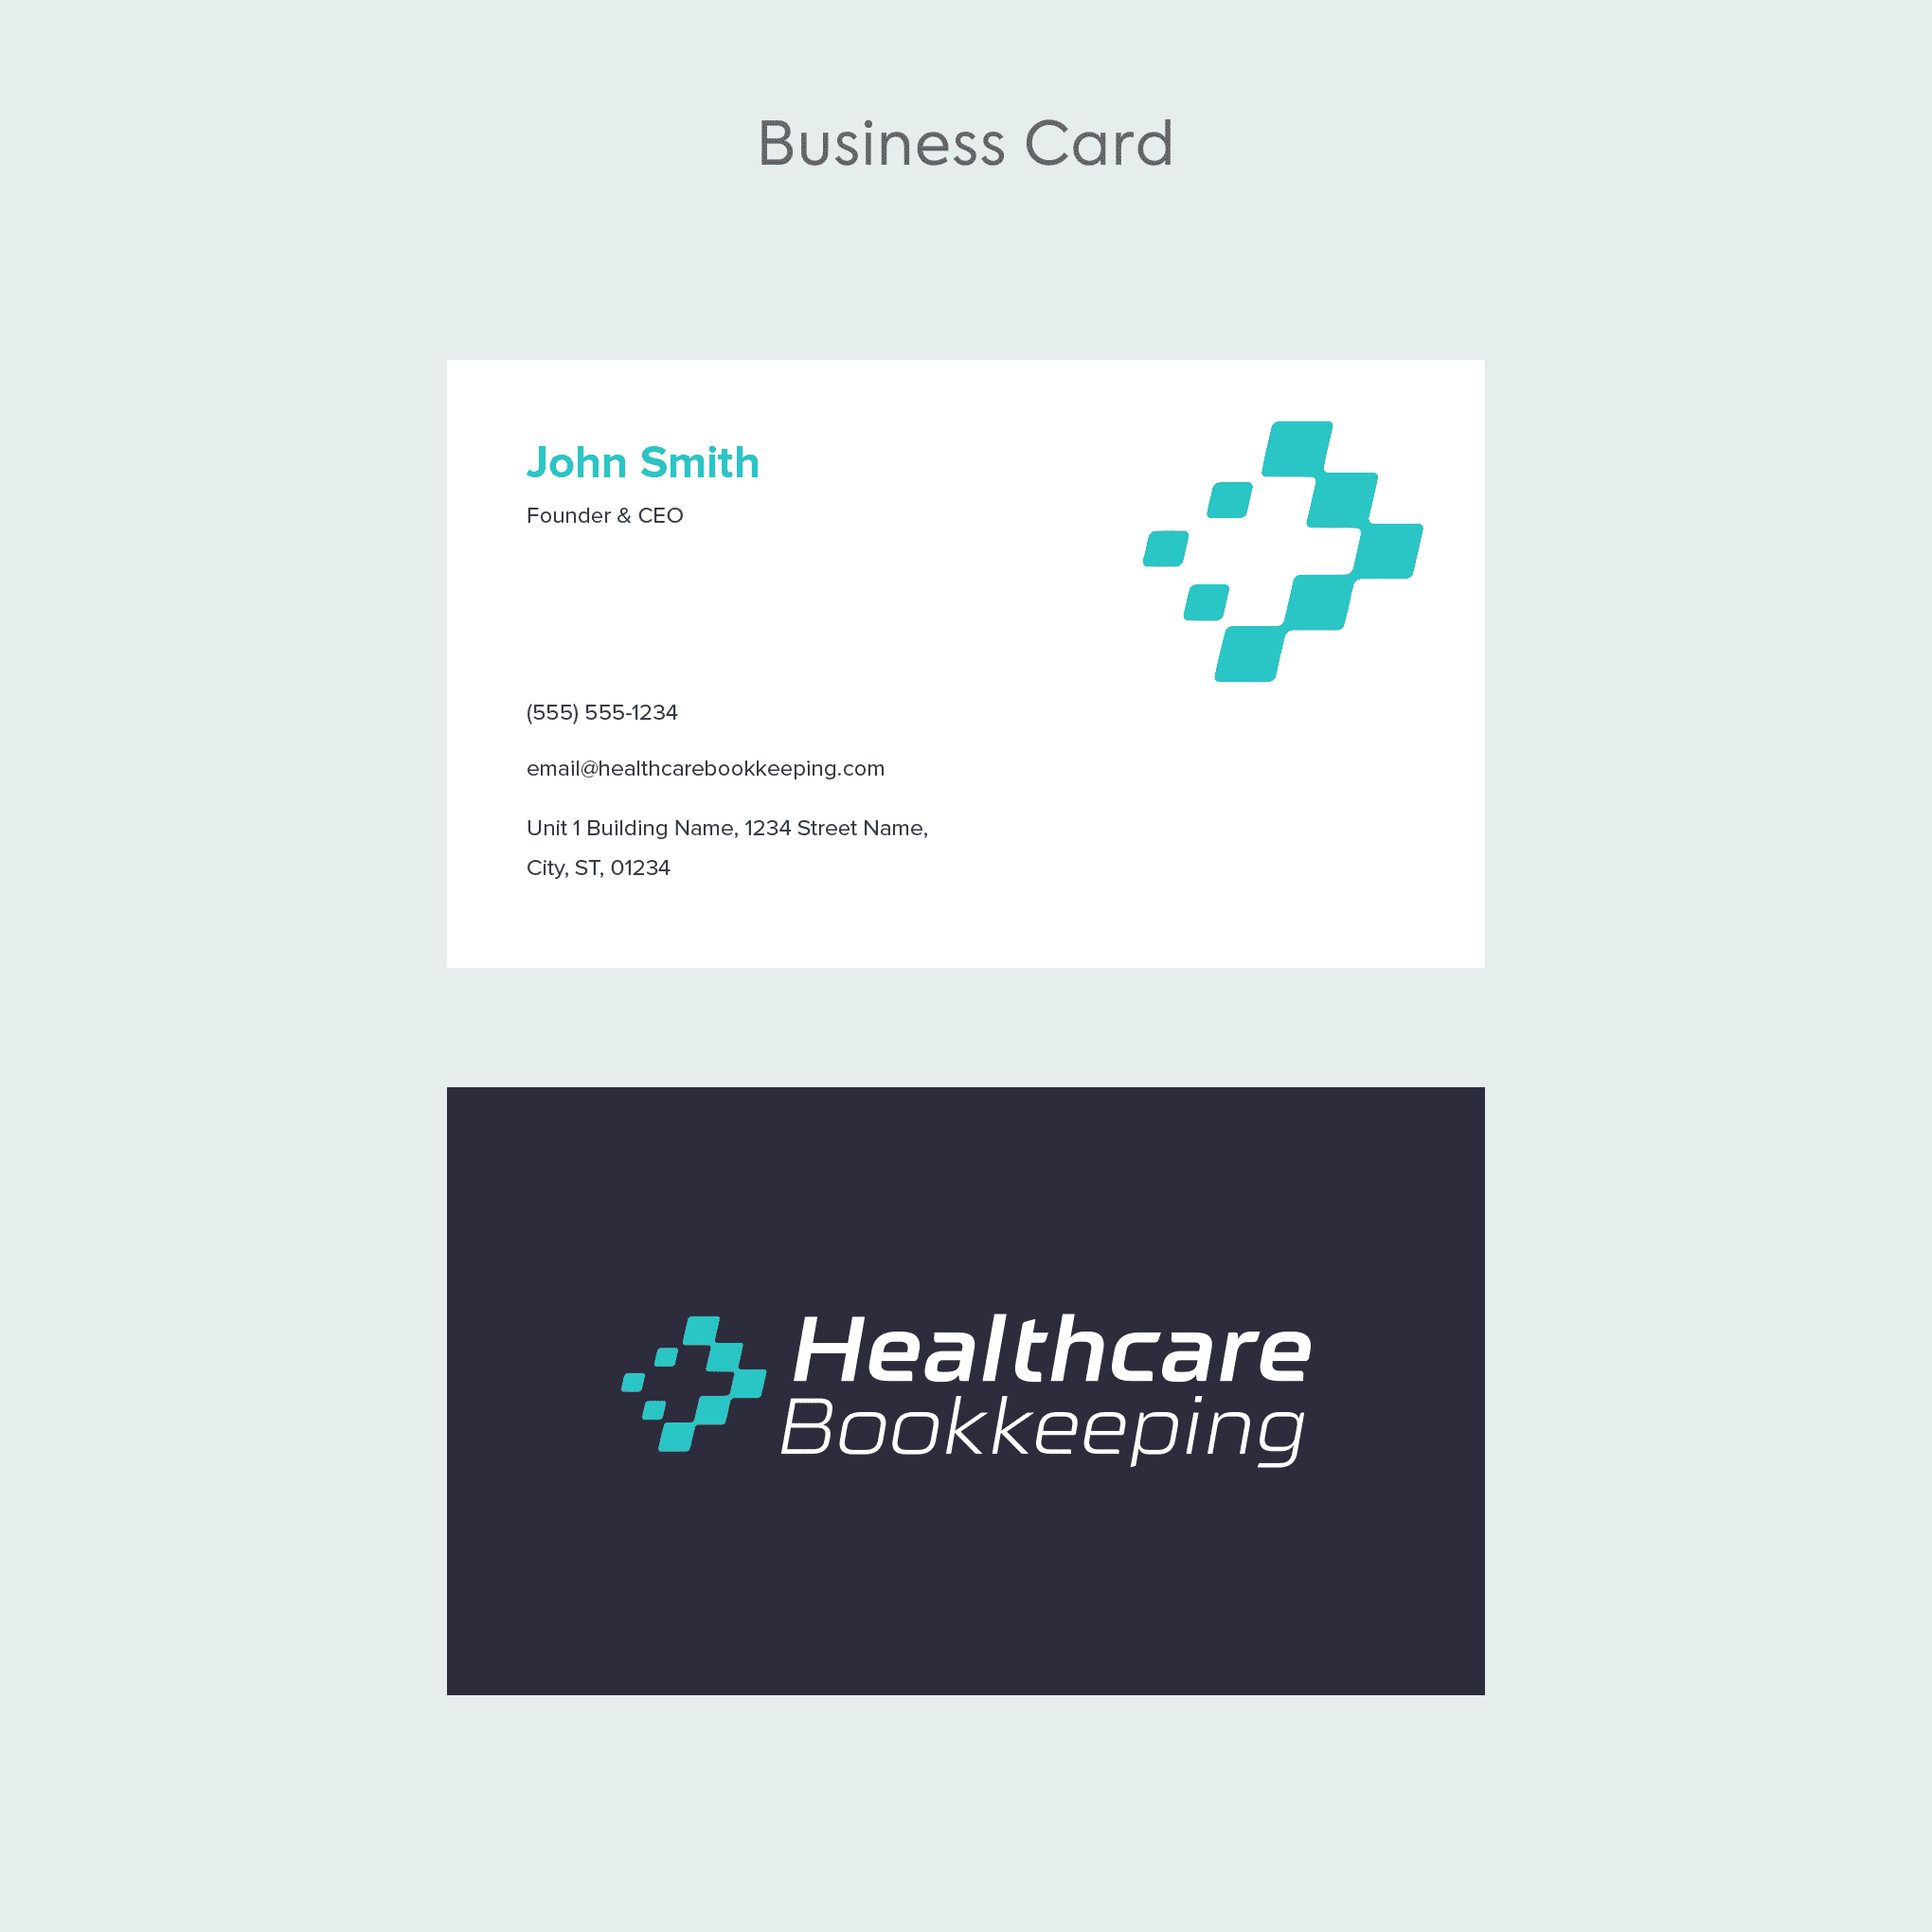 04 - Business Card Template (13)